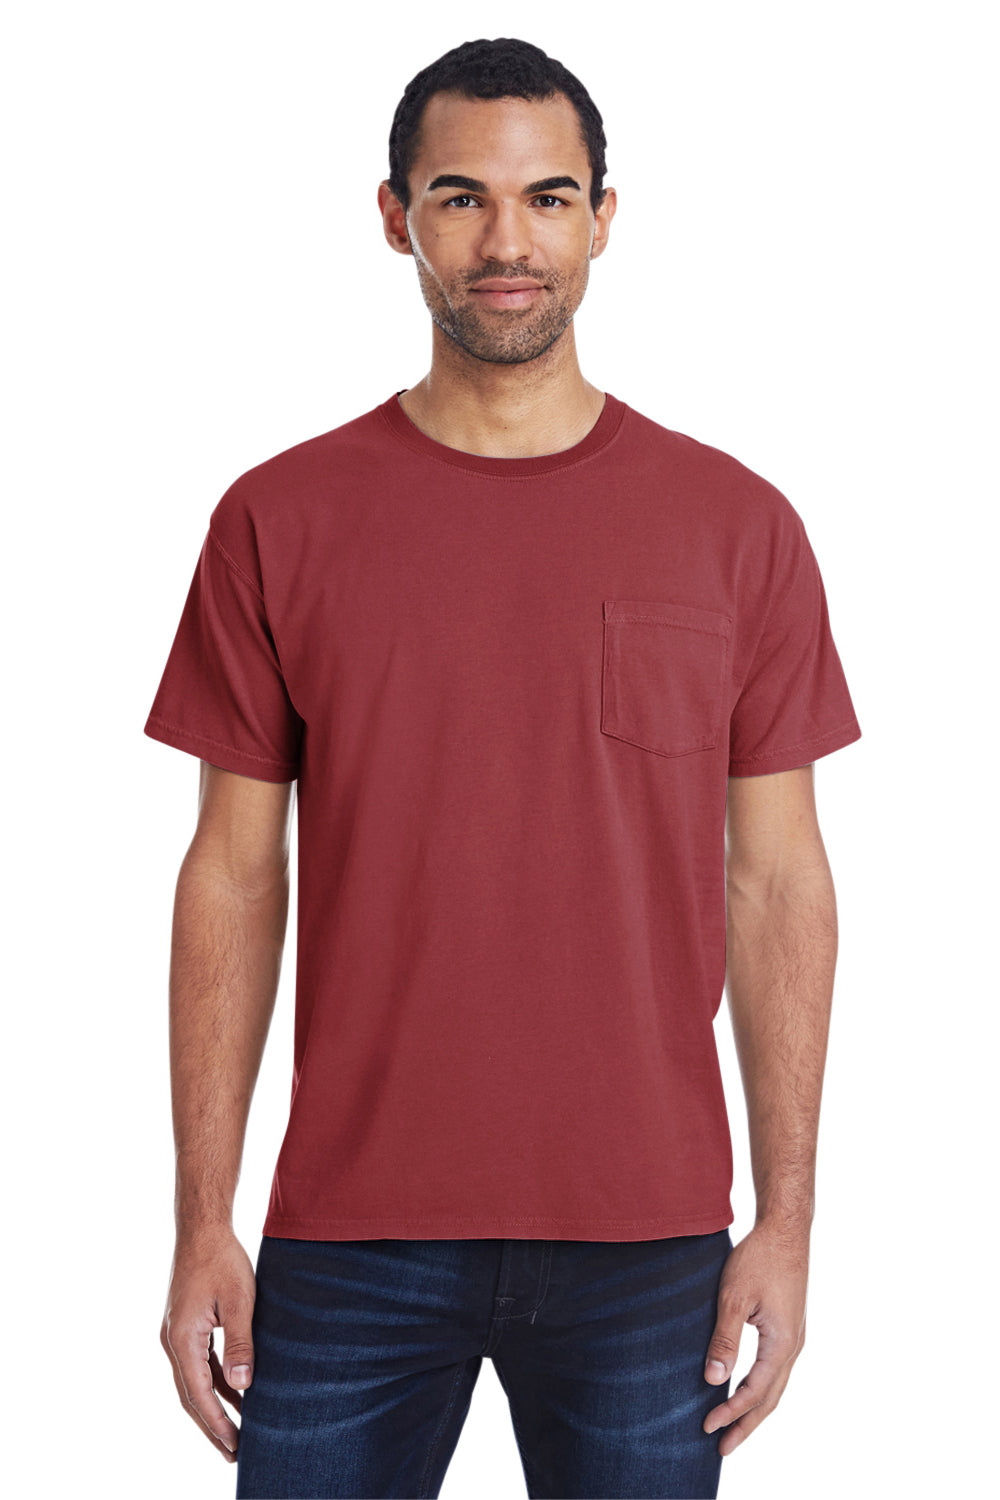 ComfortWash by Hanes GDH150 Short Sleeve Crewneck T-Shirt w/ Pocket Cayenne Red Front